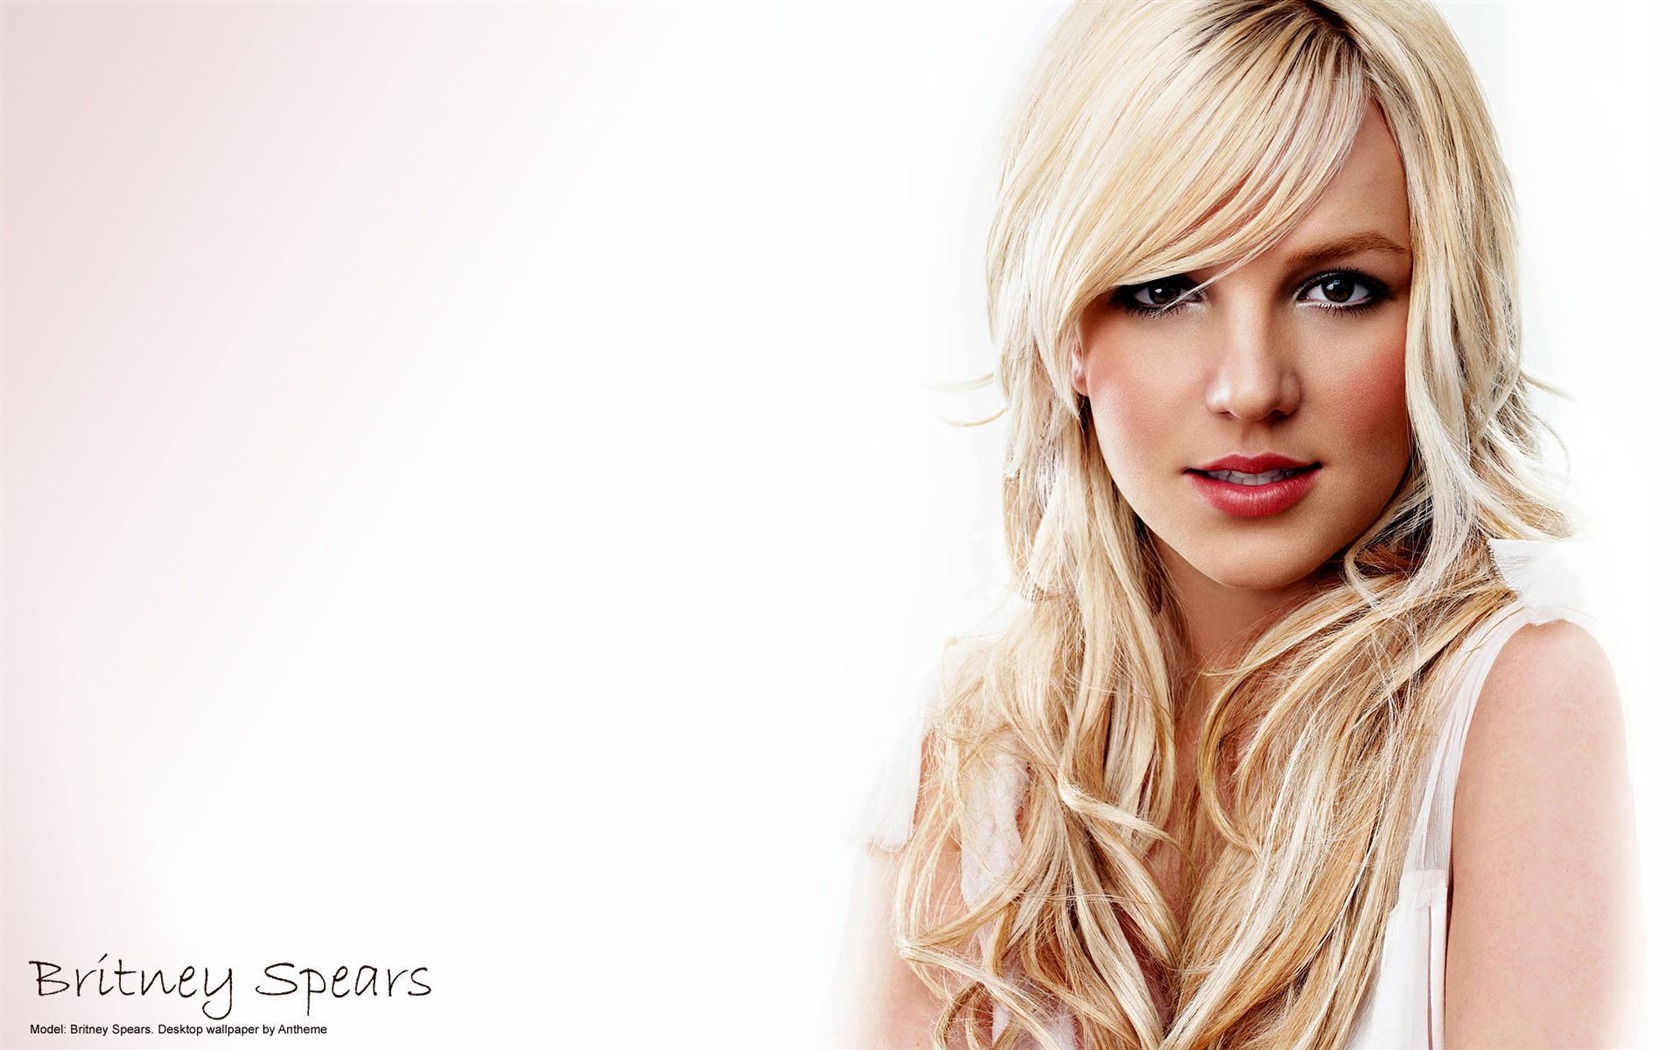 Britney Spears #015 - 1680x1050 Wallpapers Pictures Photos Images